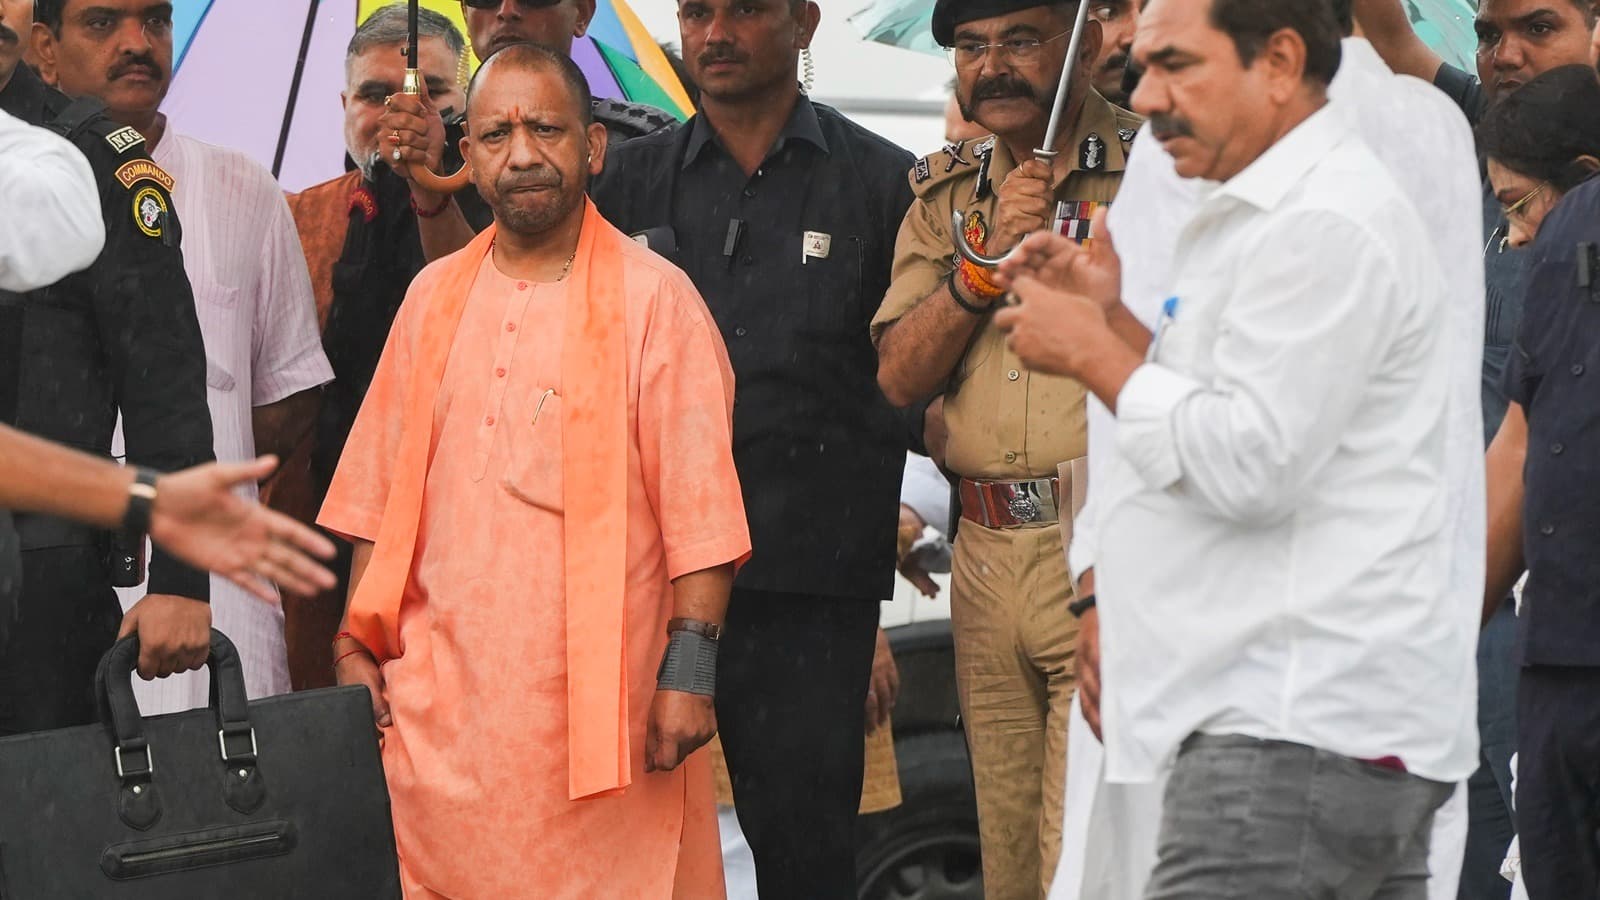 CM Yogi Adityanath during his visit at the site of the Hathras stampede which broke out at a religious congregation.